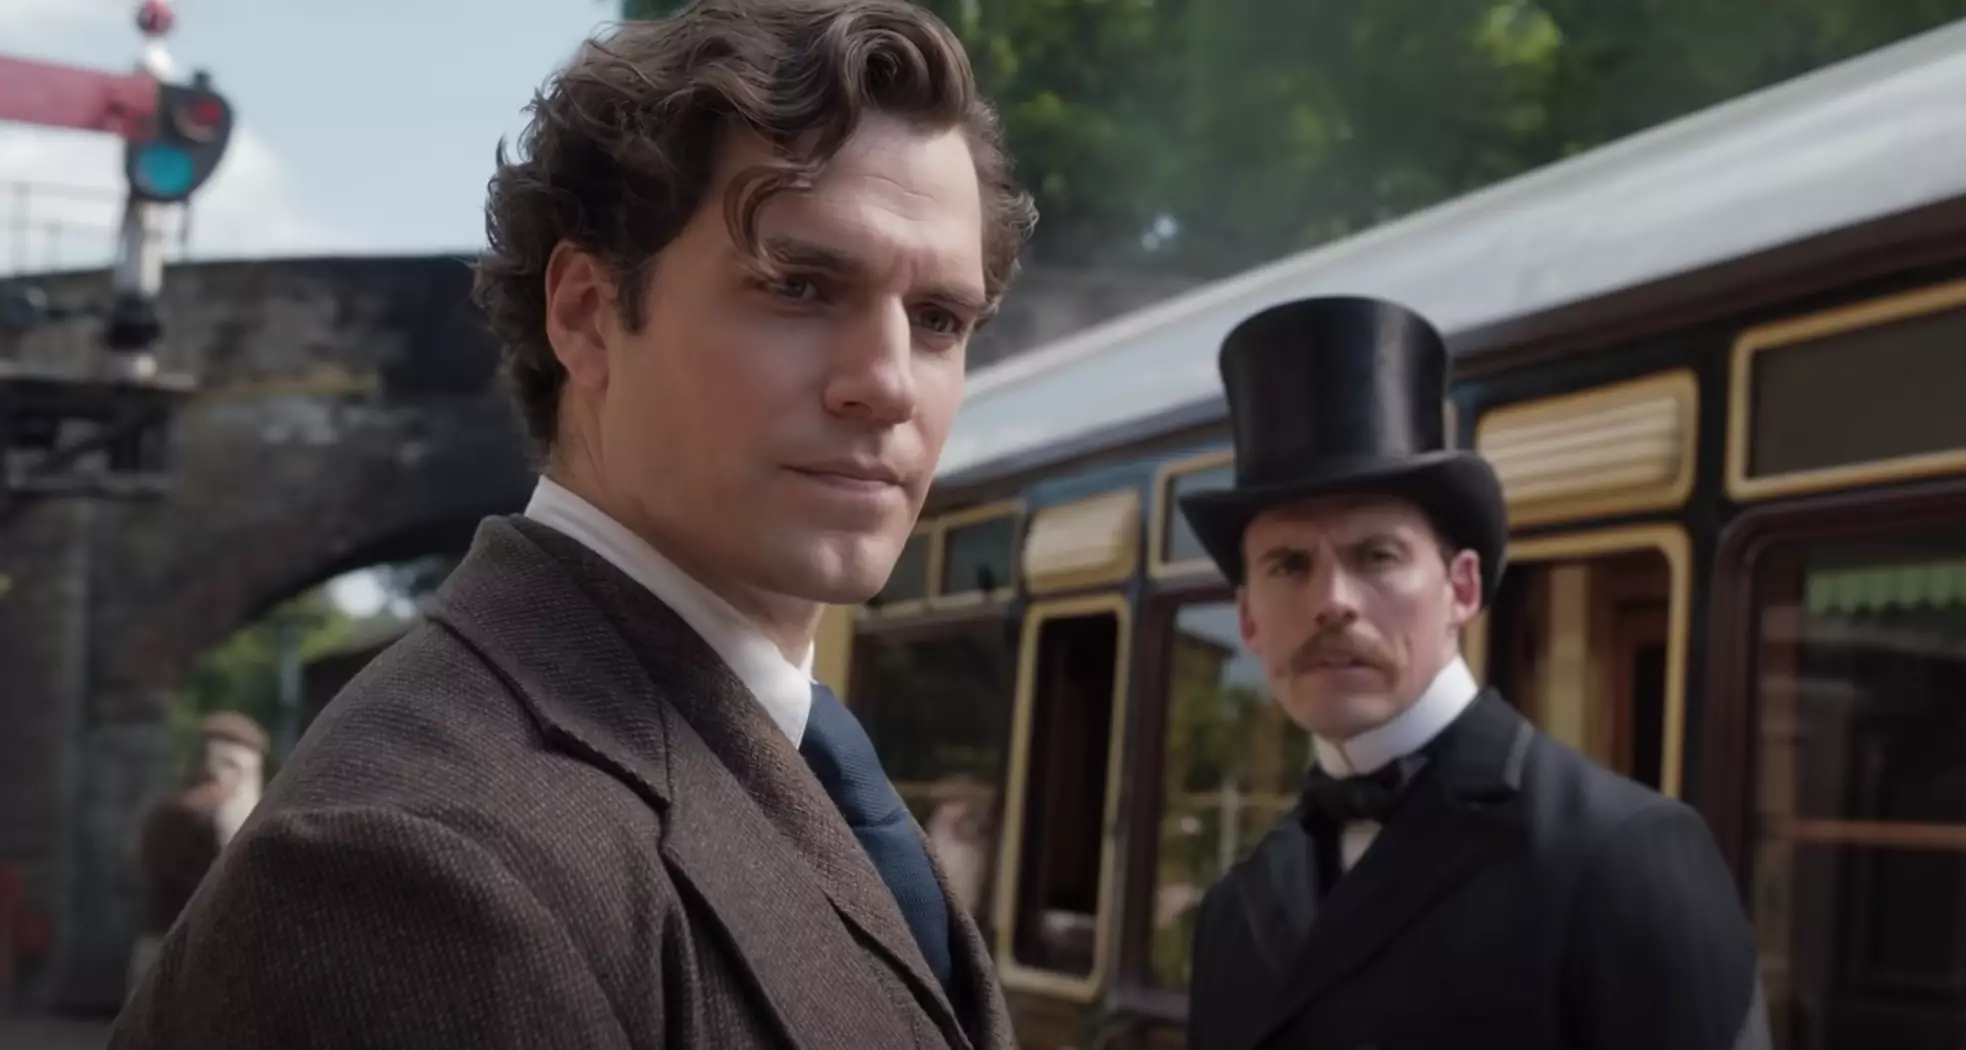 People are saying Henry Cavill is too hot to play Sherlock Holmes (